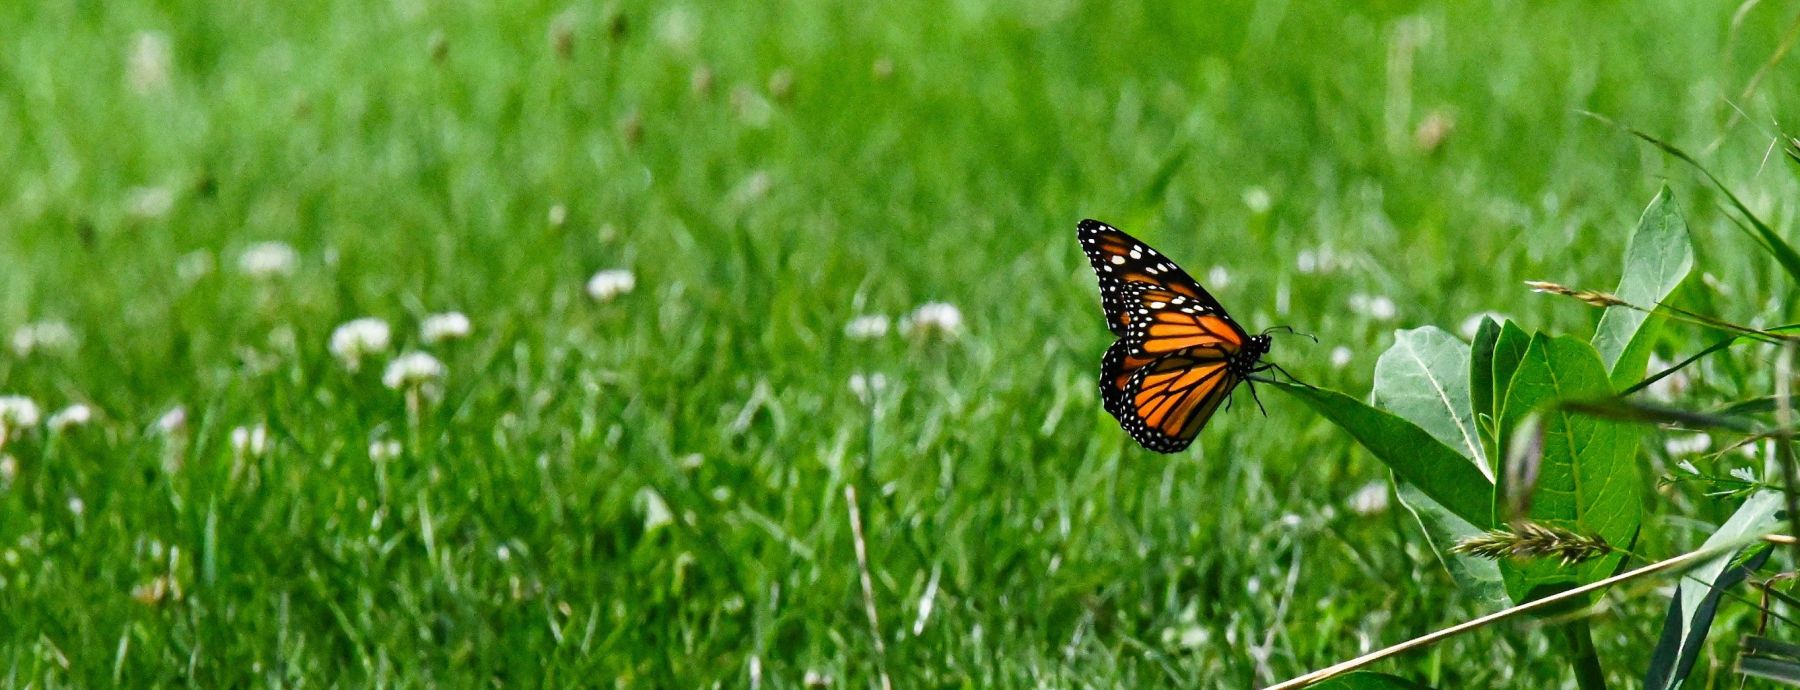 Hero image for the Center for Chemical Ecology - a monarch butterfly landing on milkweed | Photo: Jack Meyer